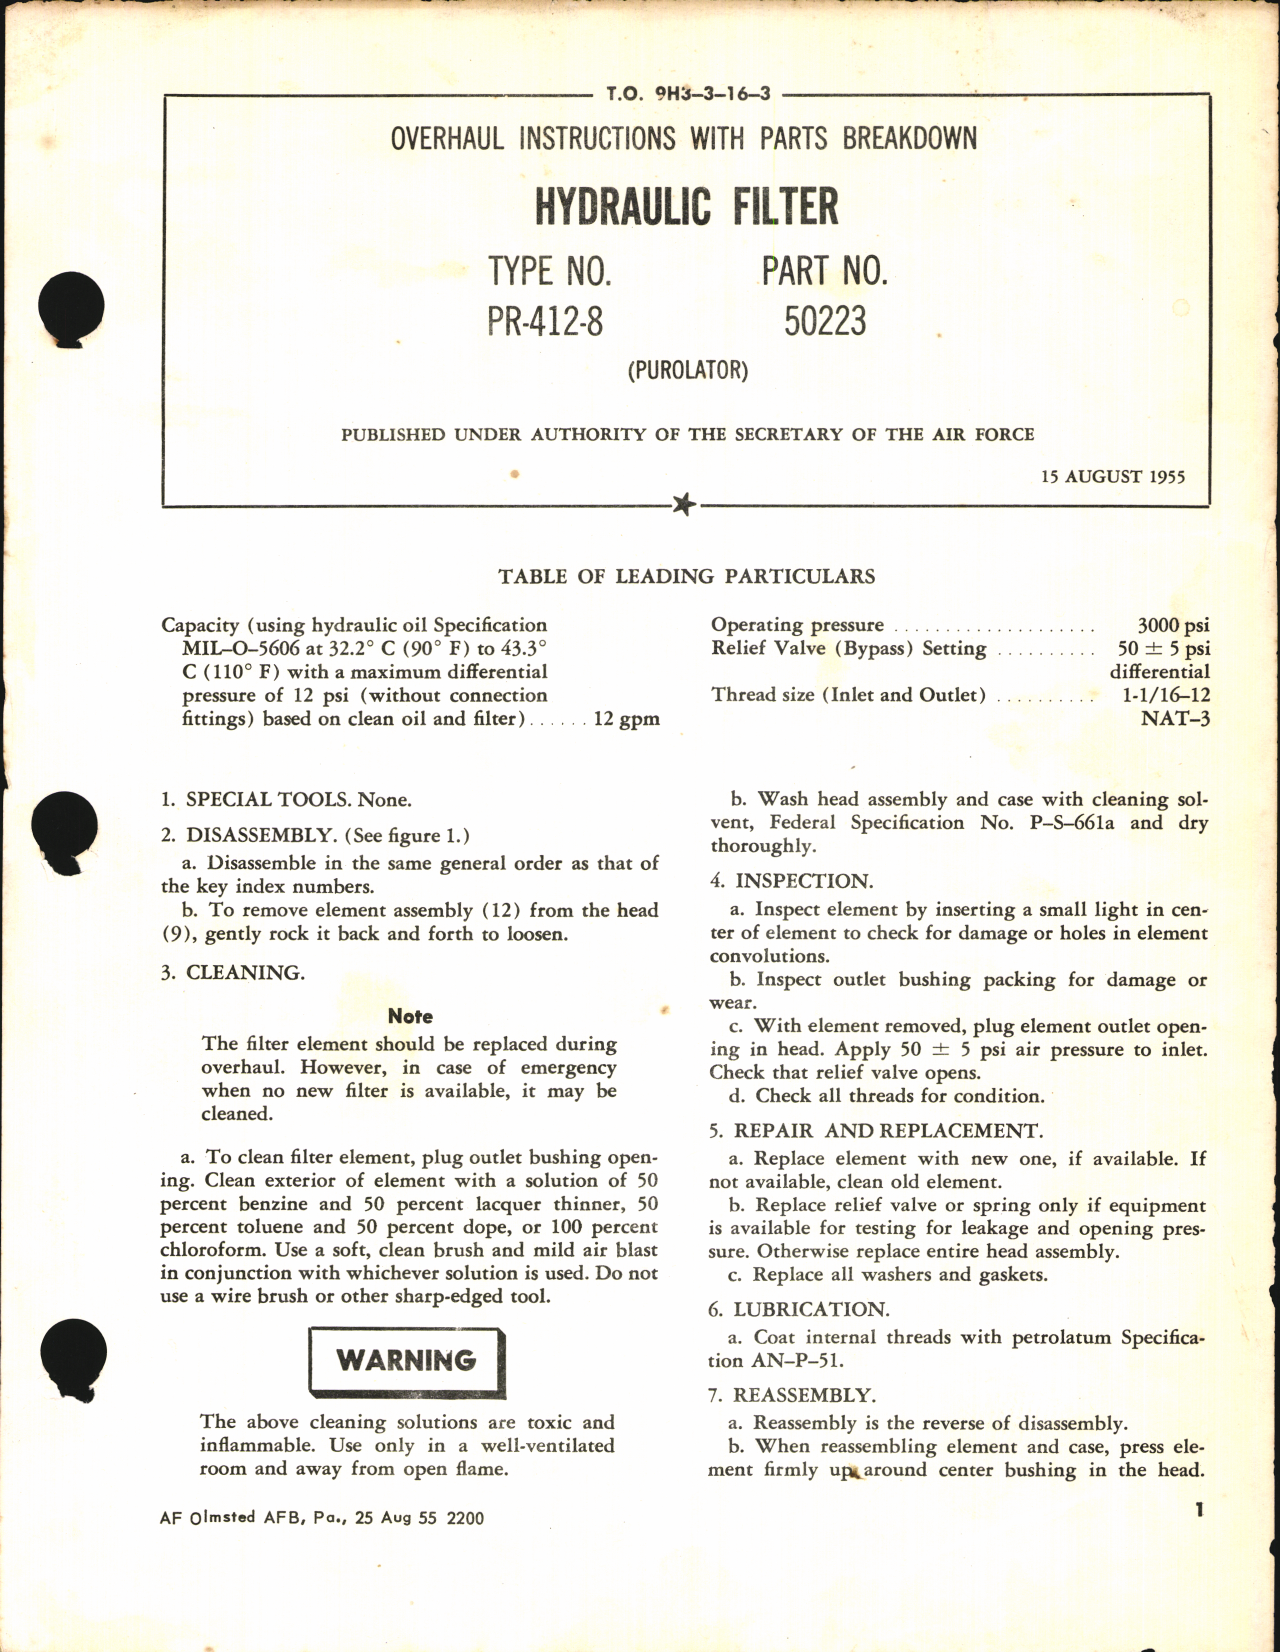 Sample page 1 from AirCorps Library document: Overhaul Instructions with Parts Breakdown for Hydraulic Filter, Type No. PR-412-8, Part No. 50223